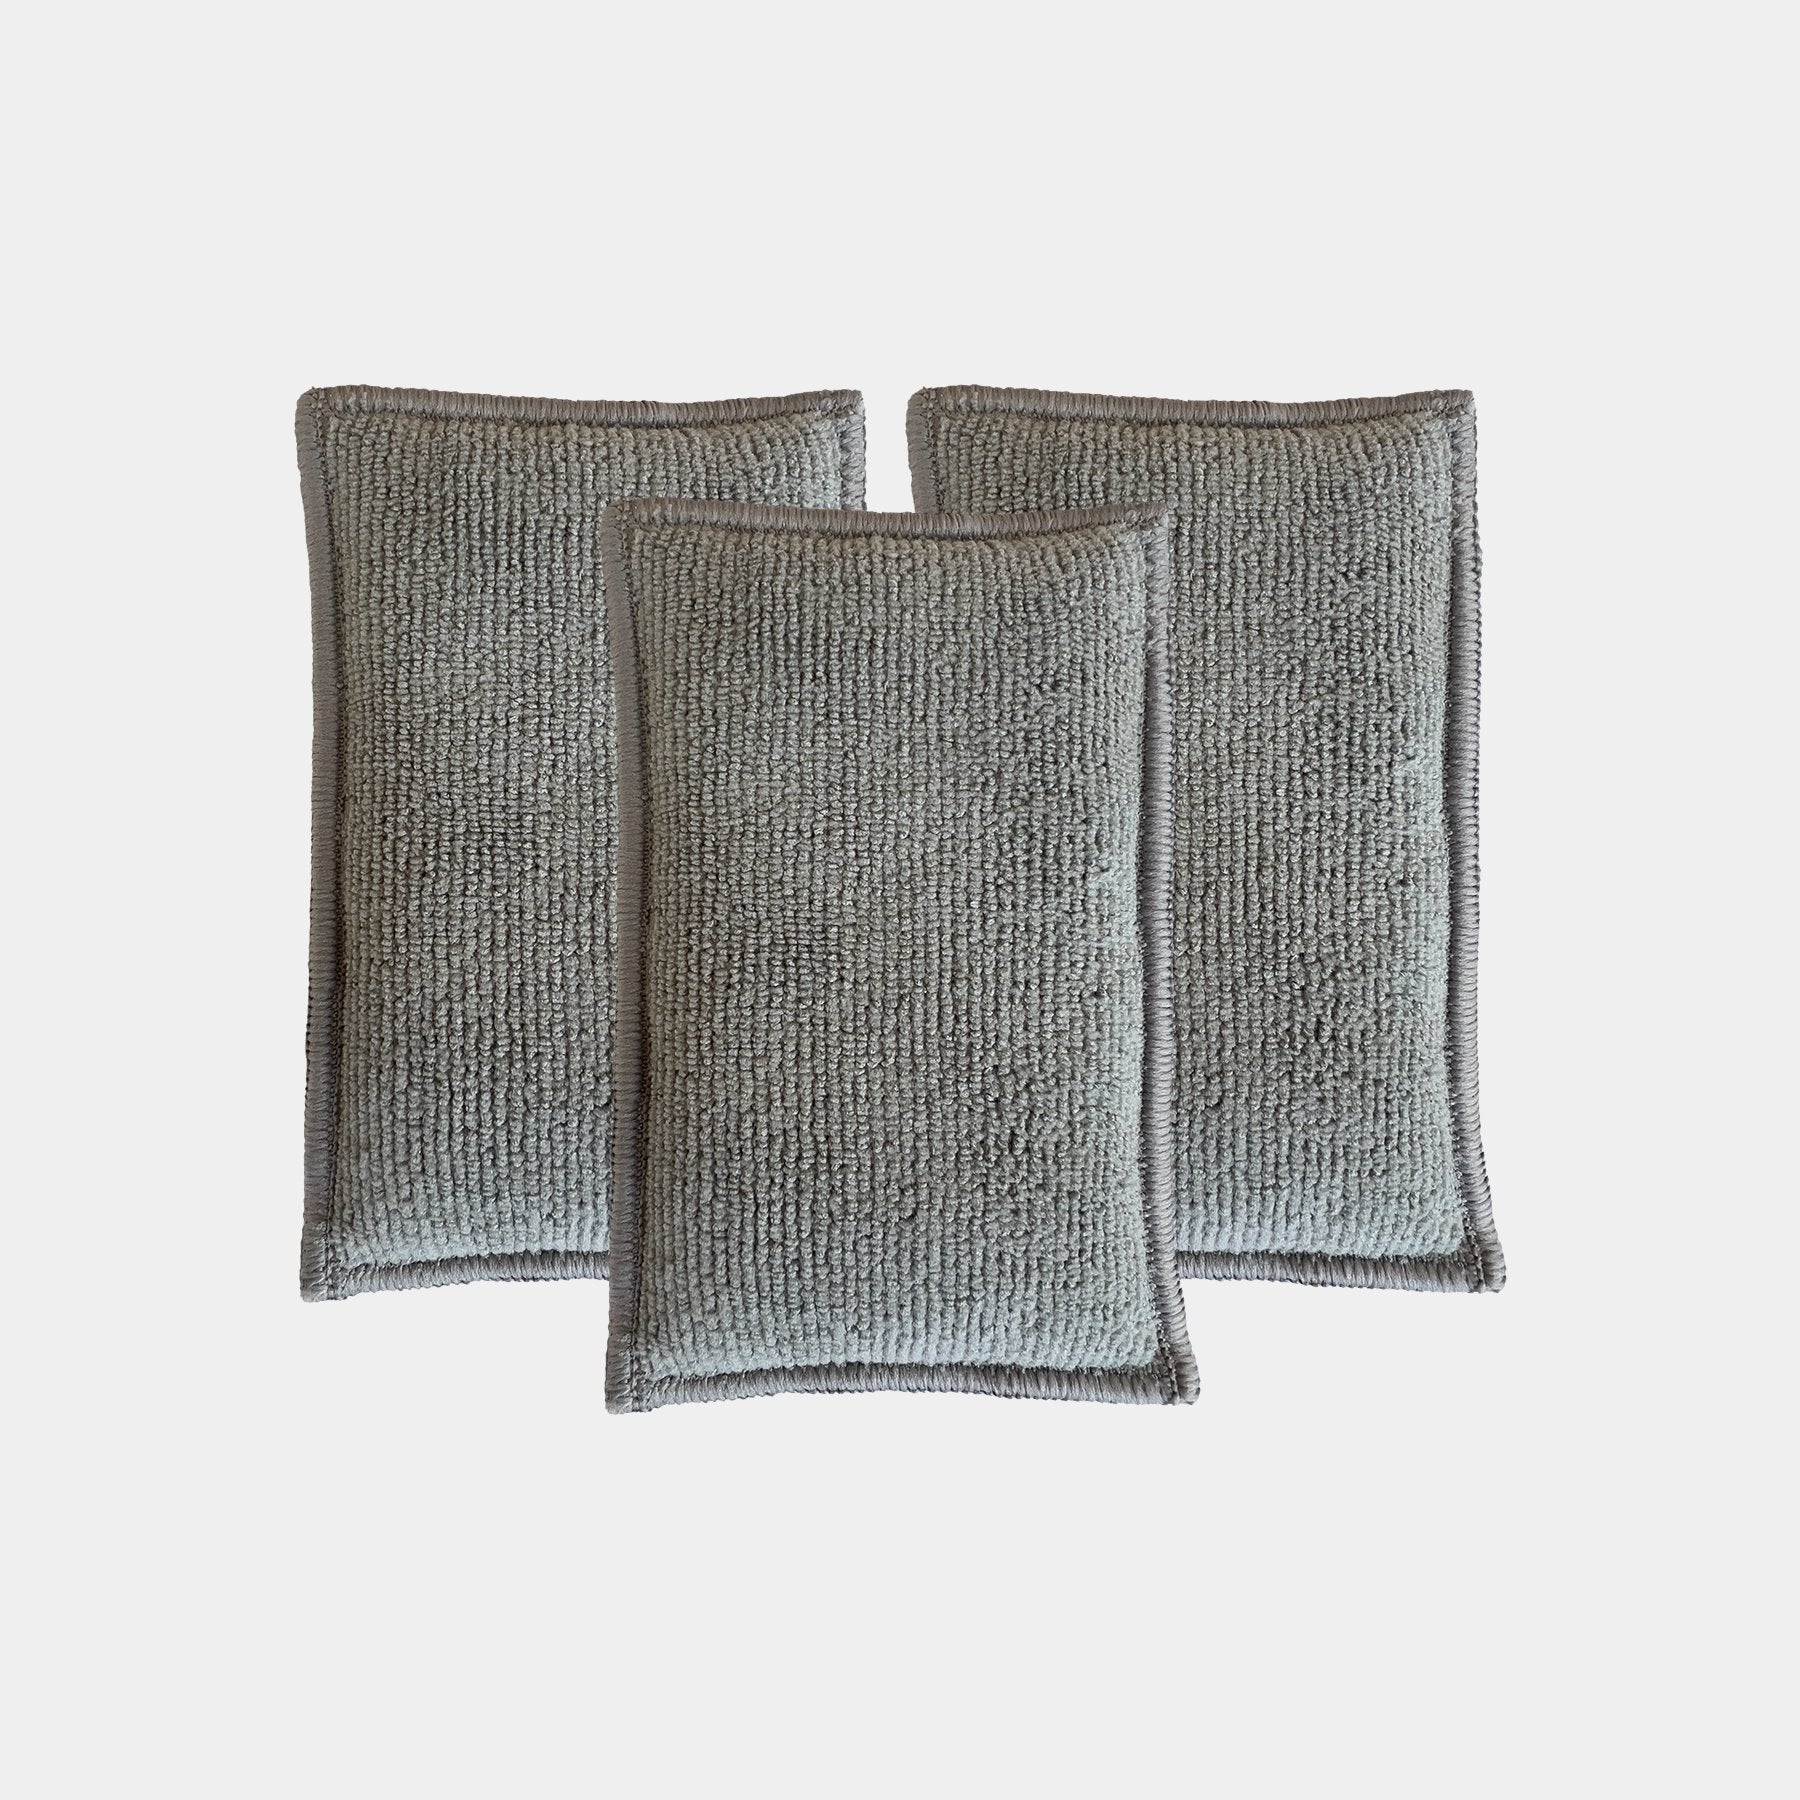 Car care three microfibre grey interior scrub pads are displayed on a white background.